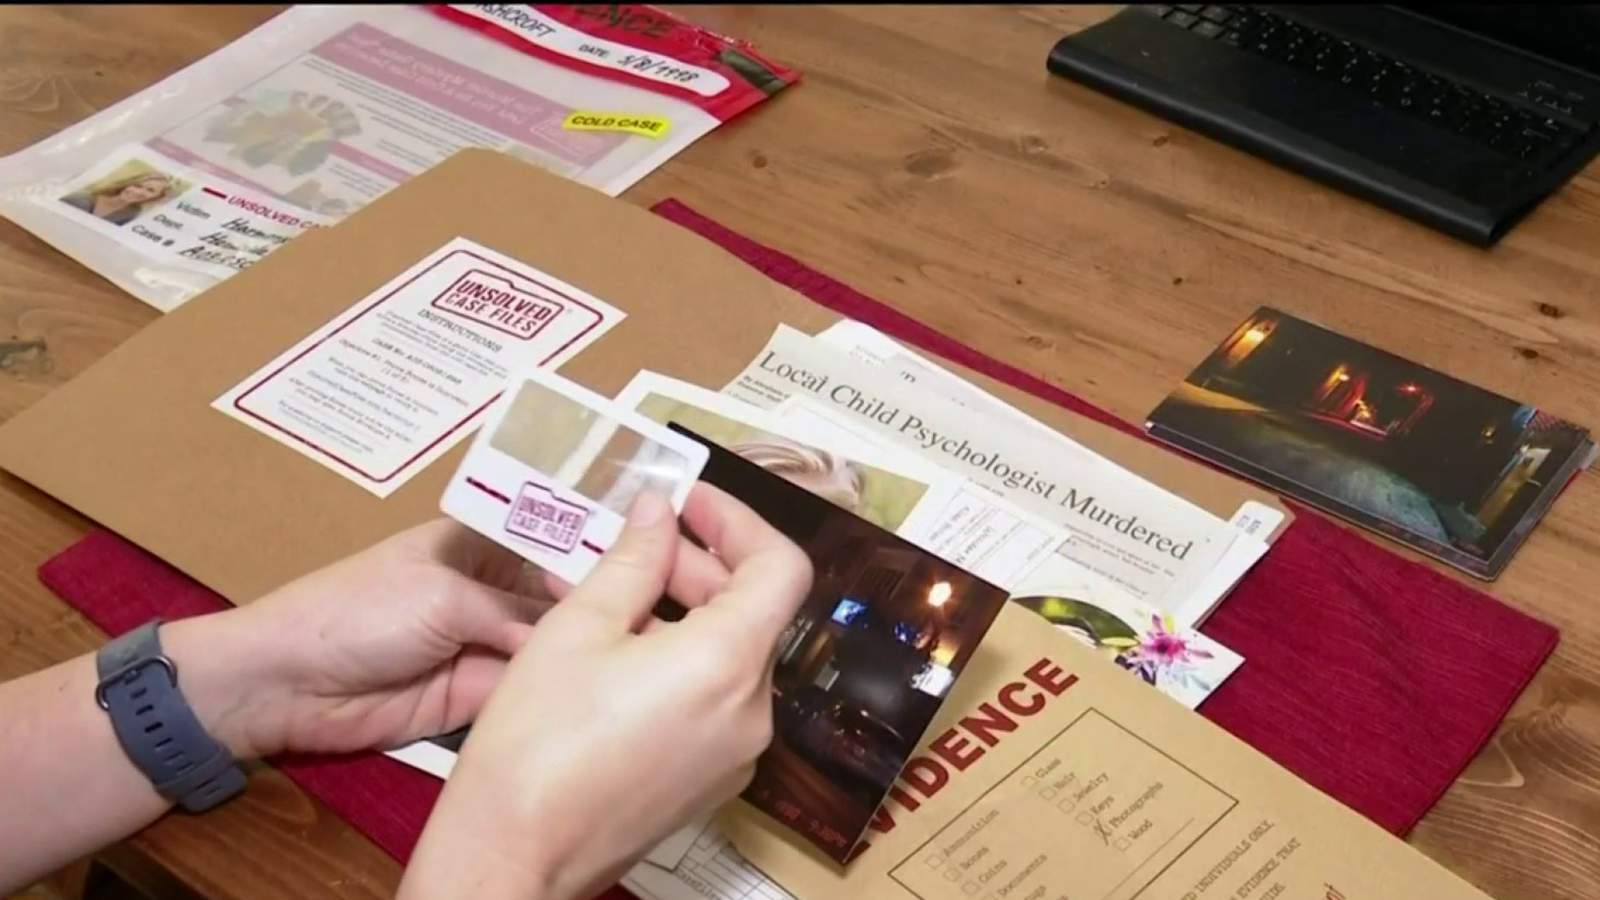 This fun game turns you and your friends into online detectives